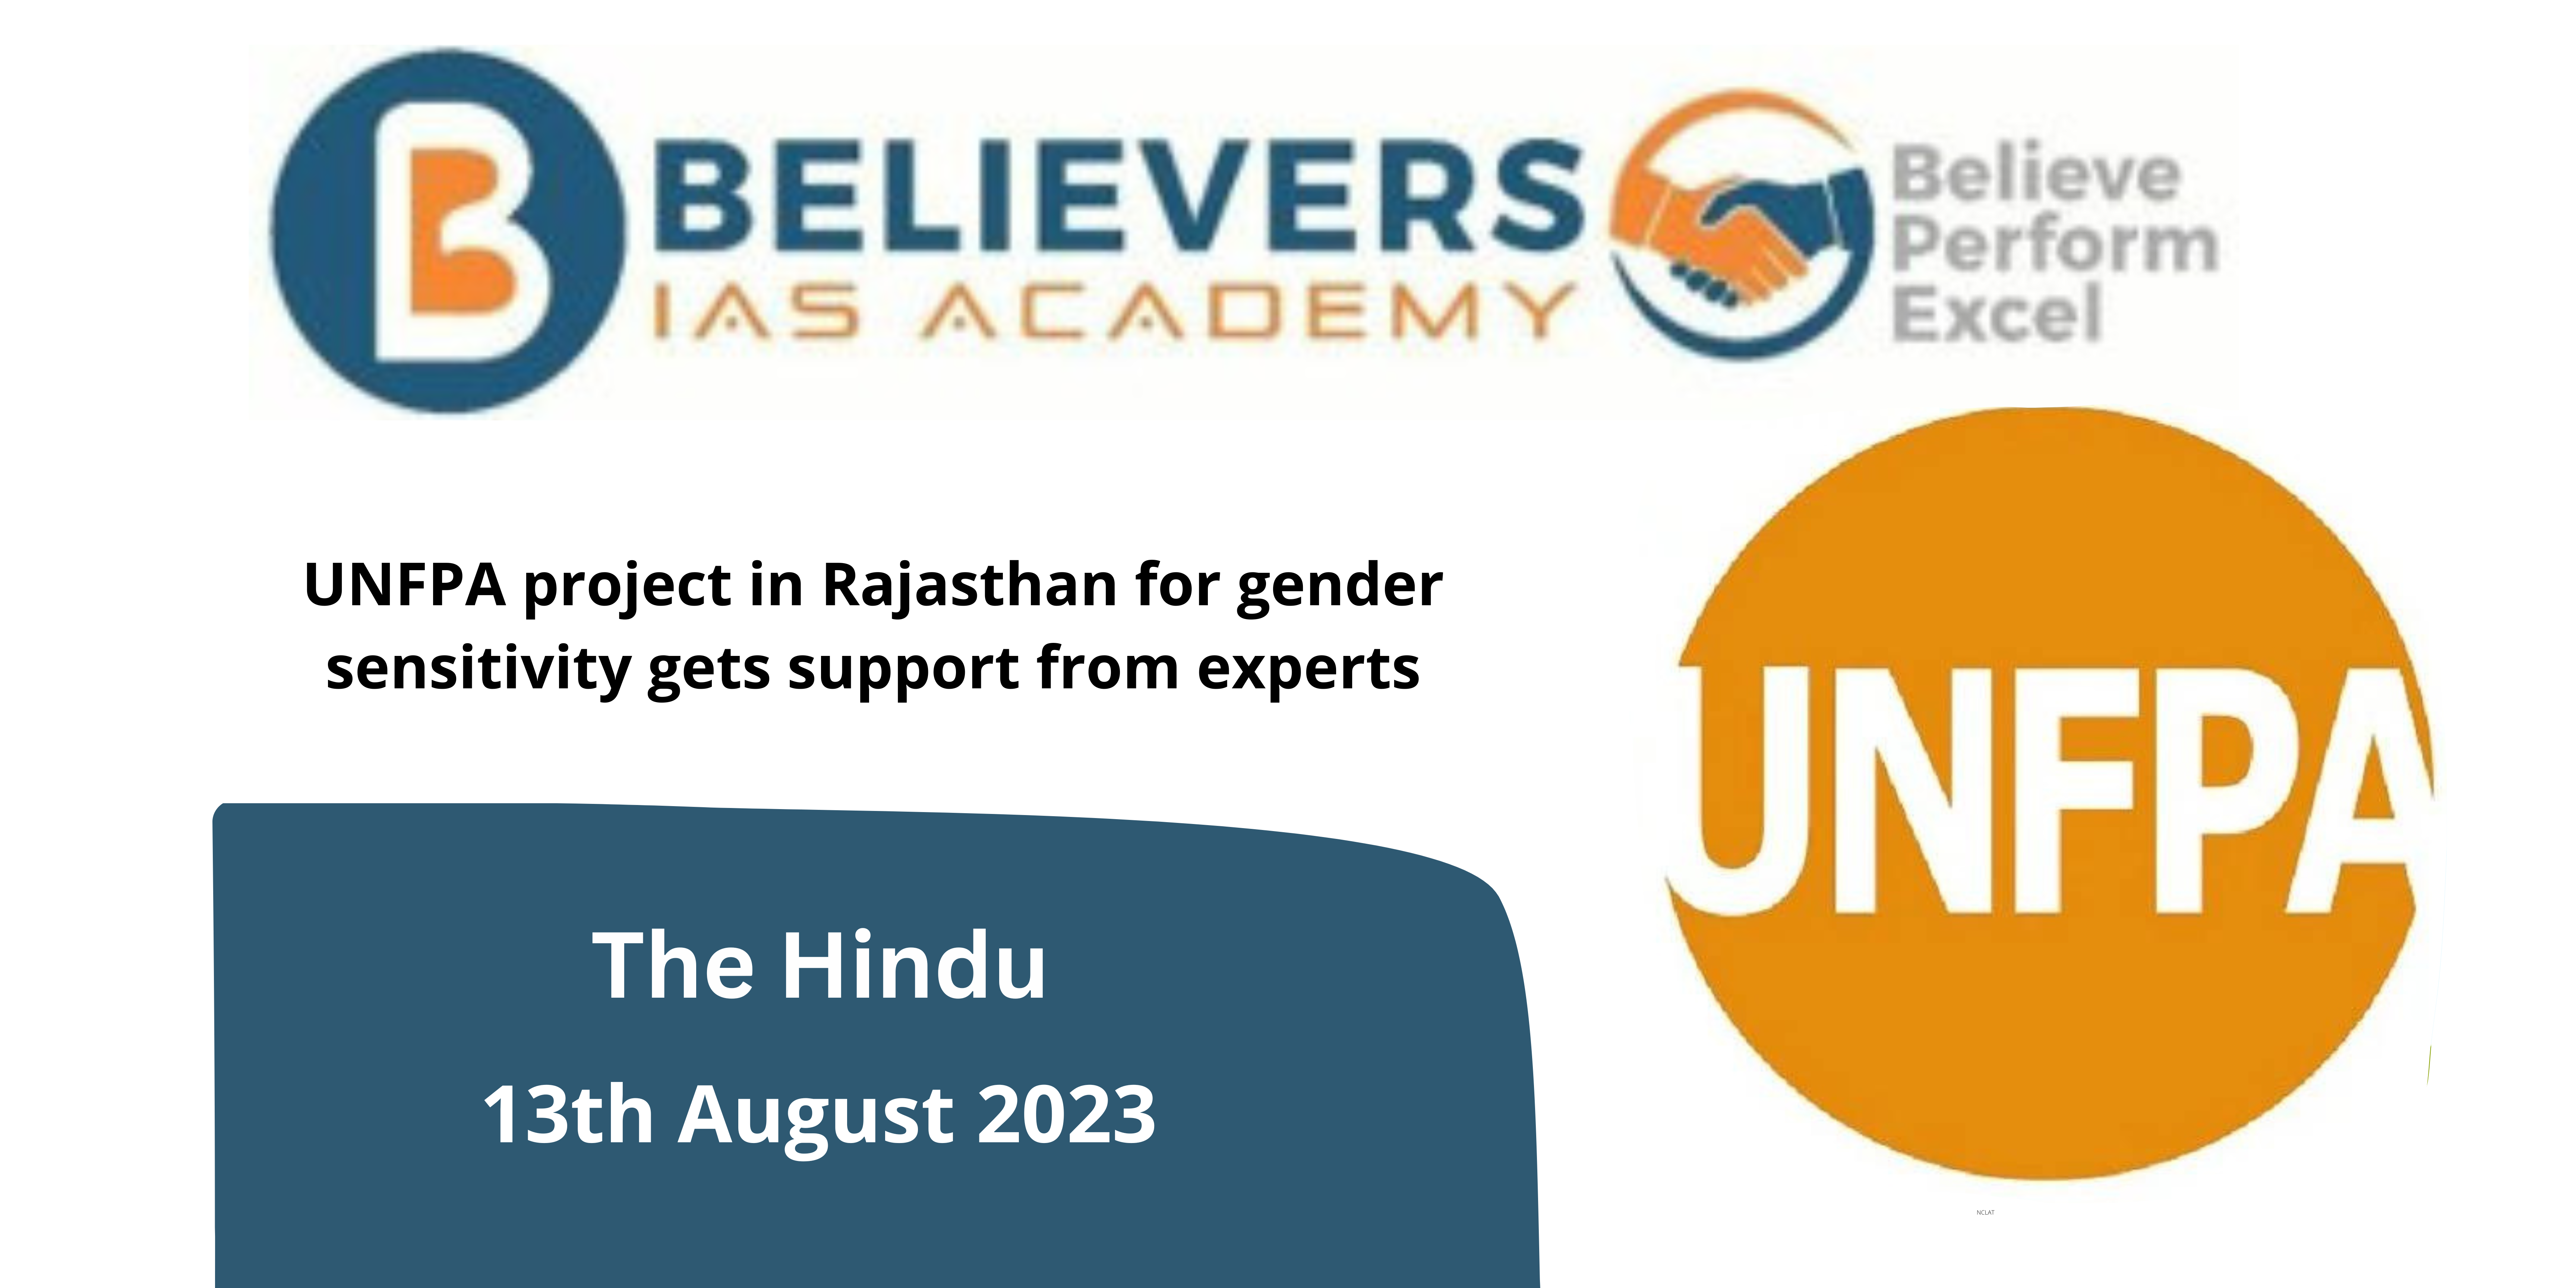 UNFPA project in Rajasthan for gender sensitivity gets support from experts